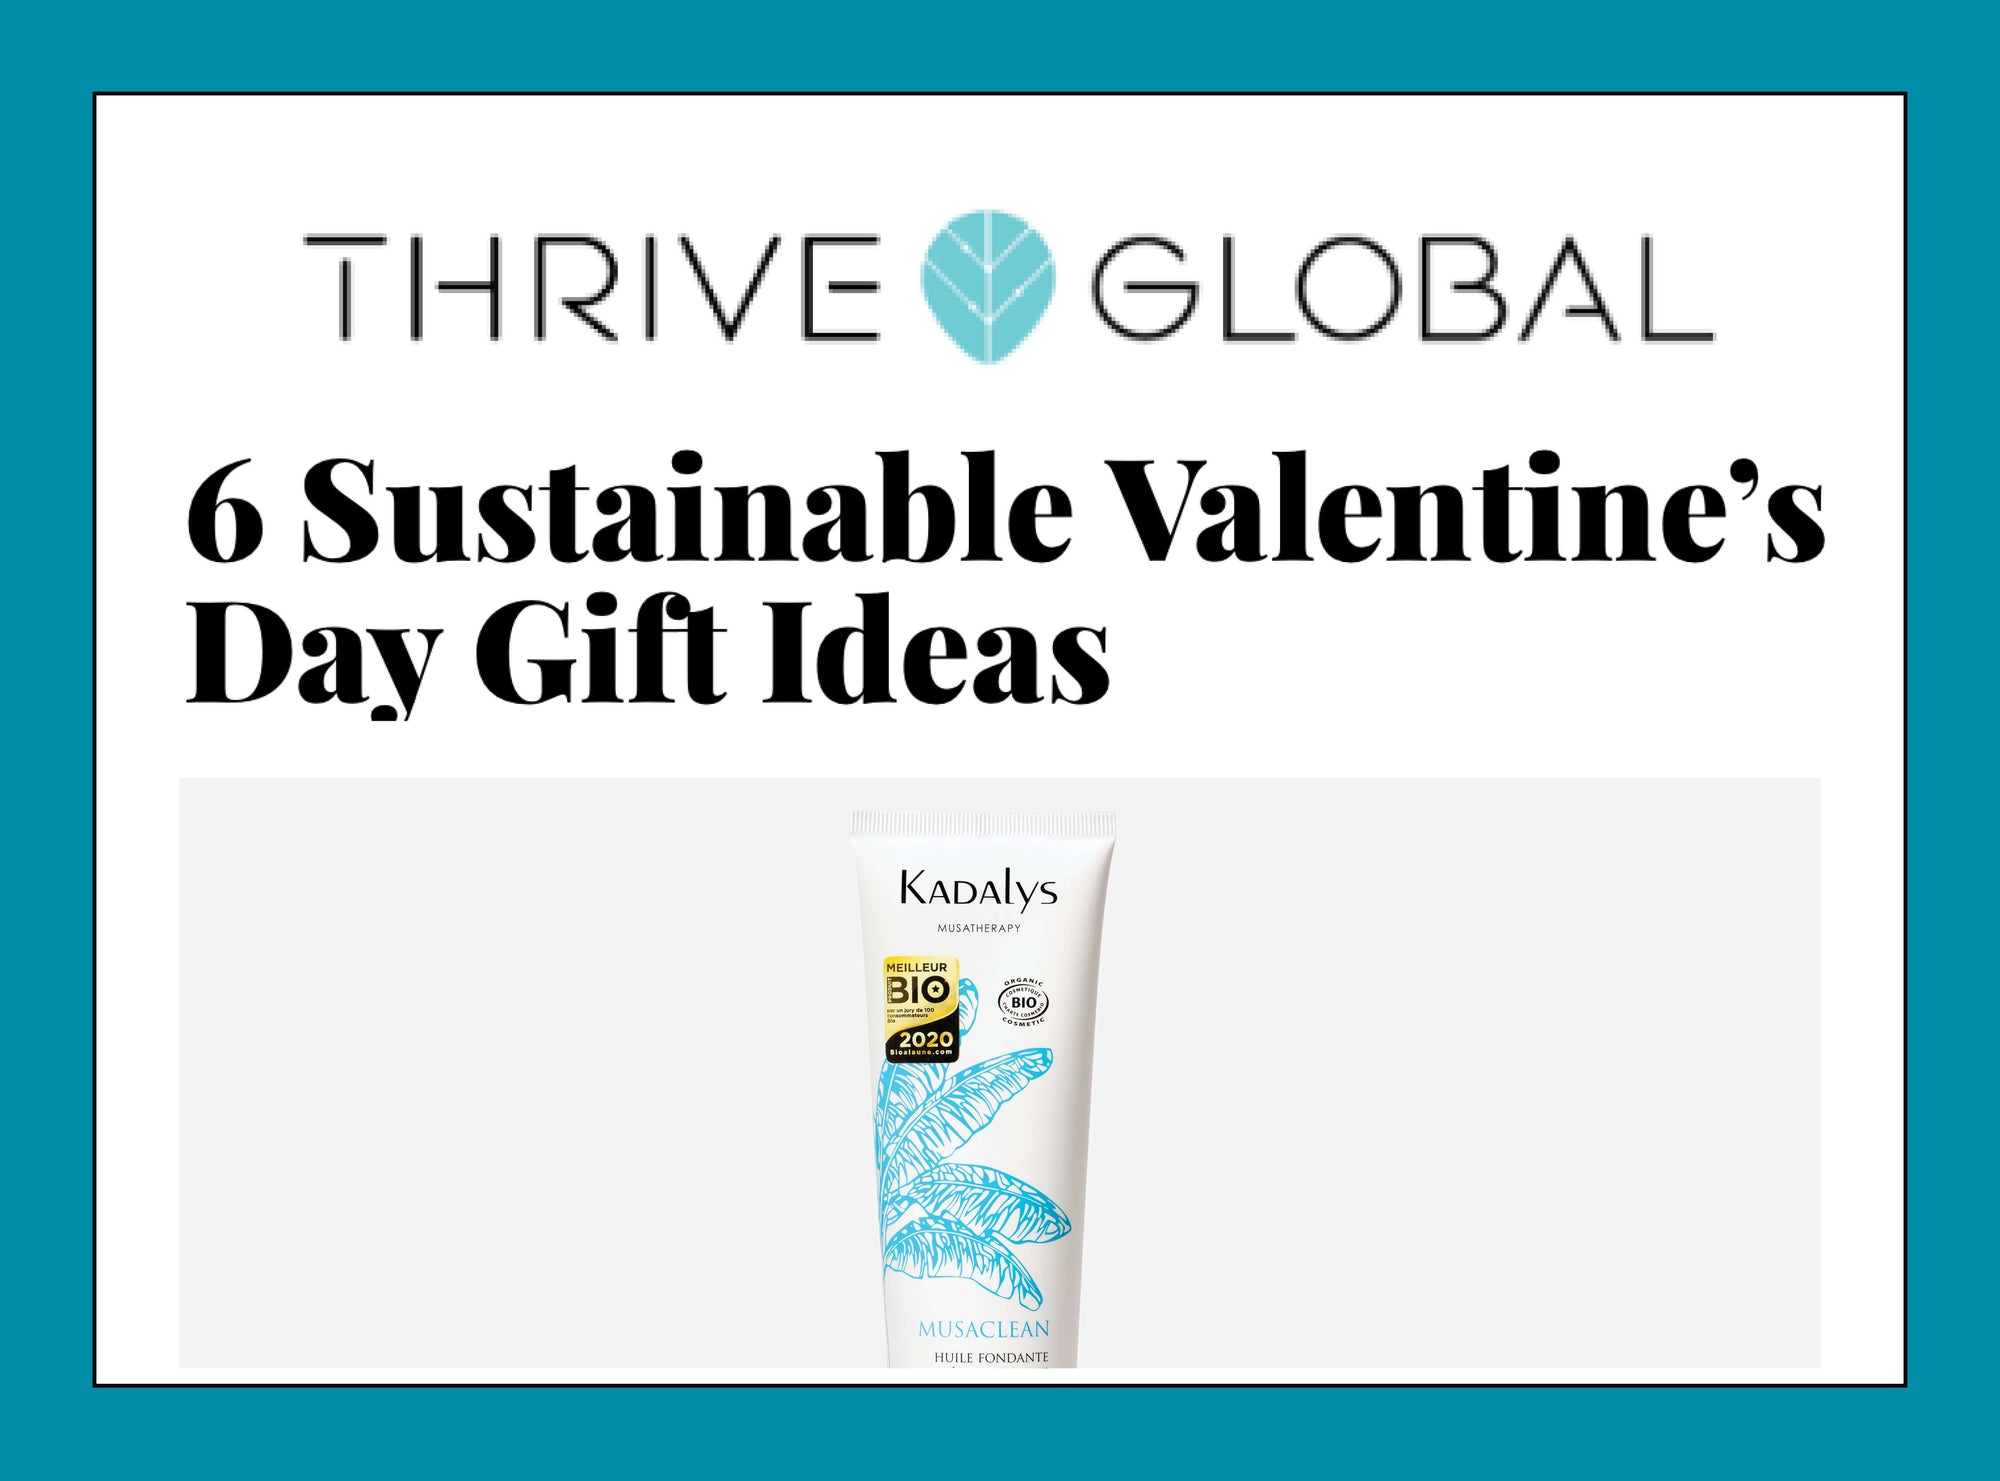 Thrive Global features Kadalys Organic Pure Melt Cleansing Gel in Oil as a sustainable gift idea for Valentine's Days.